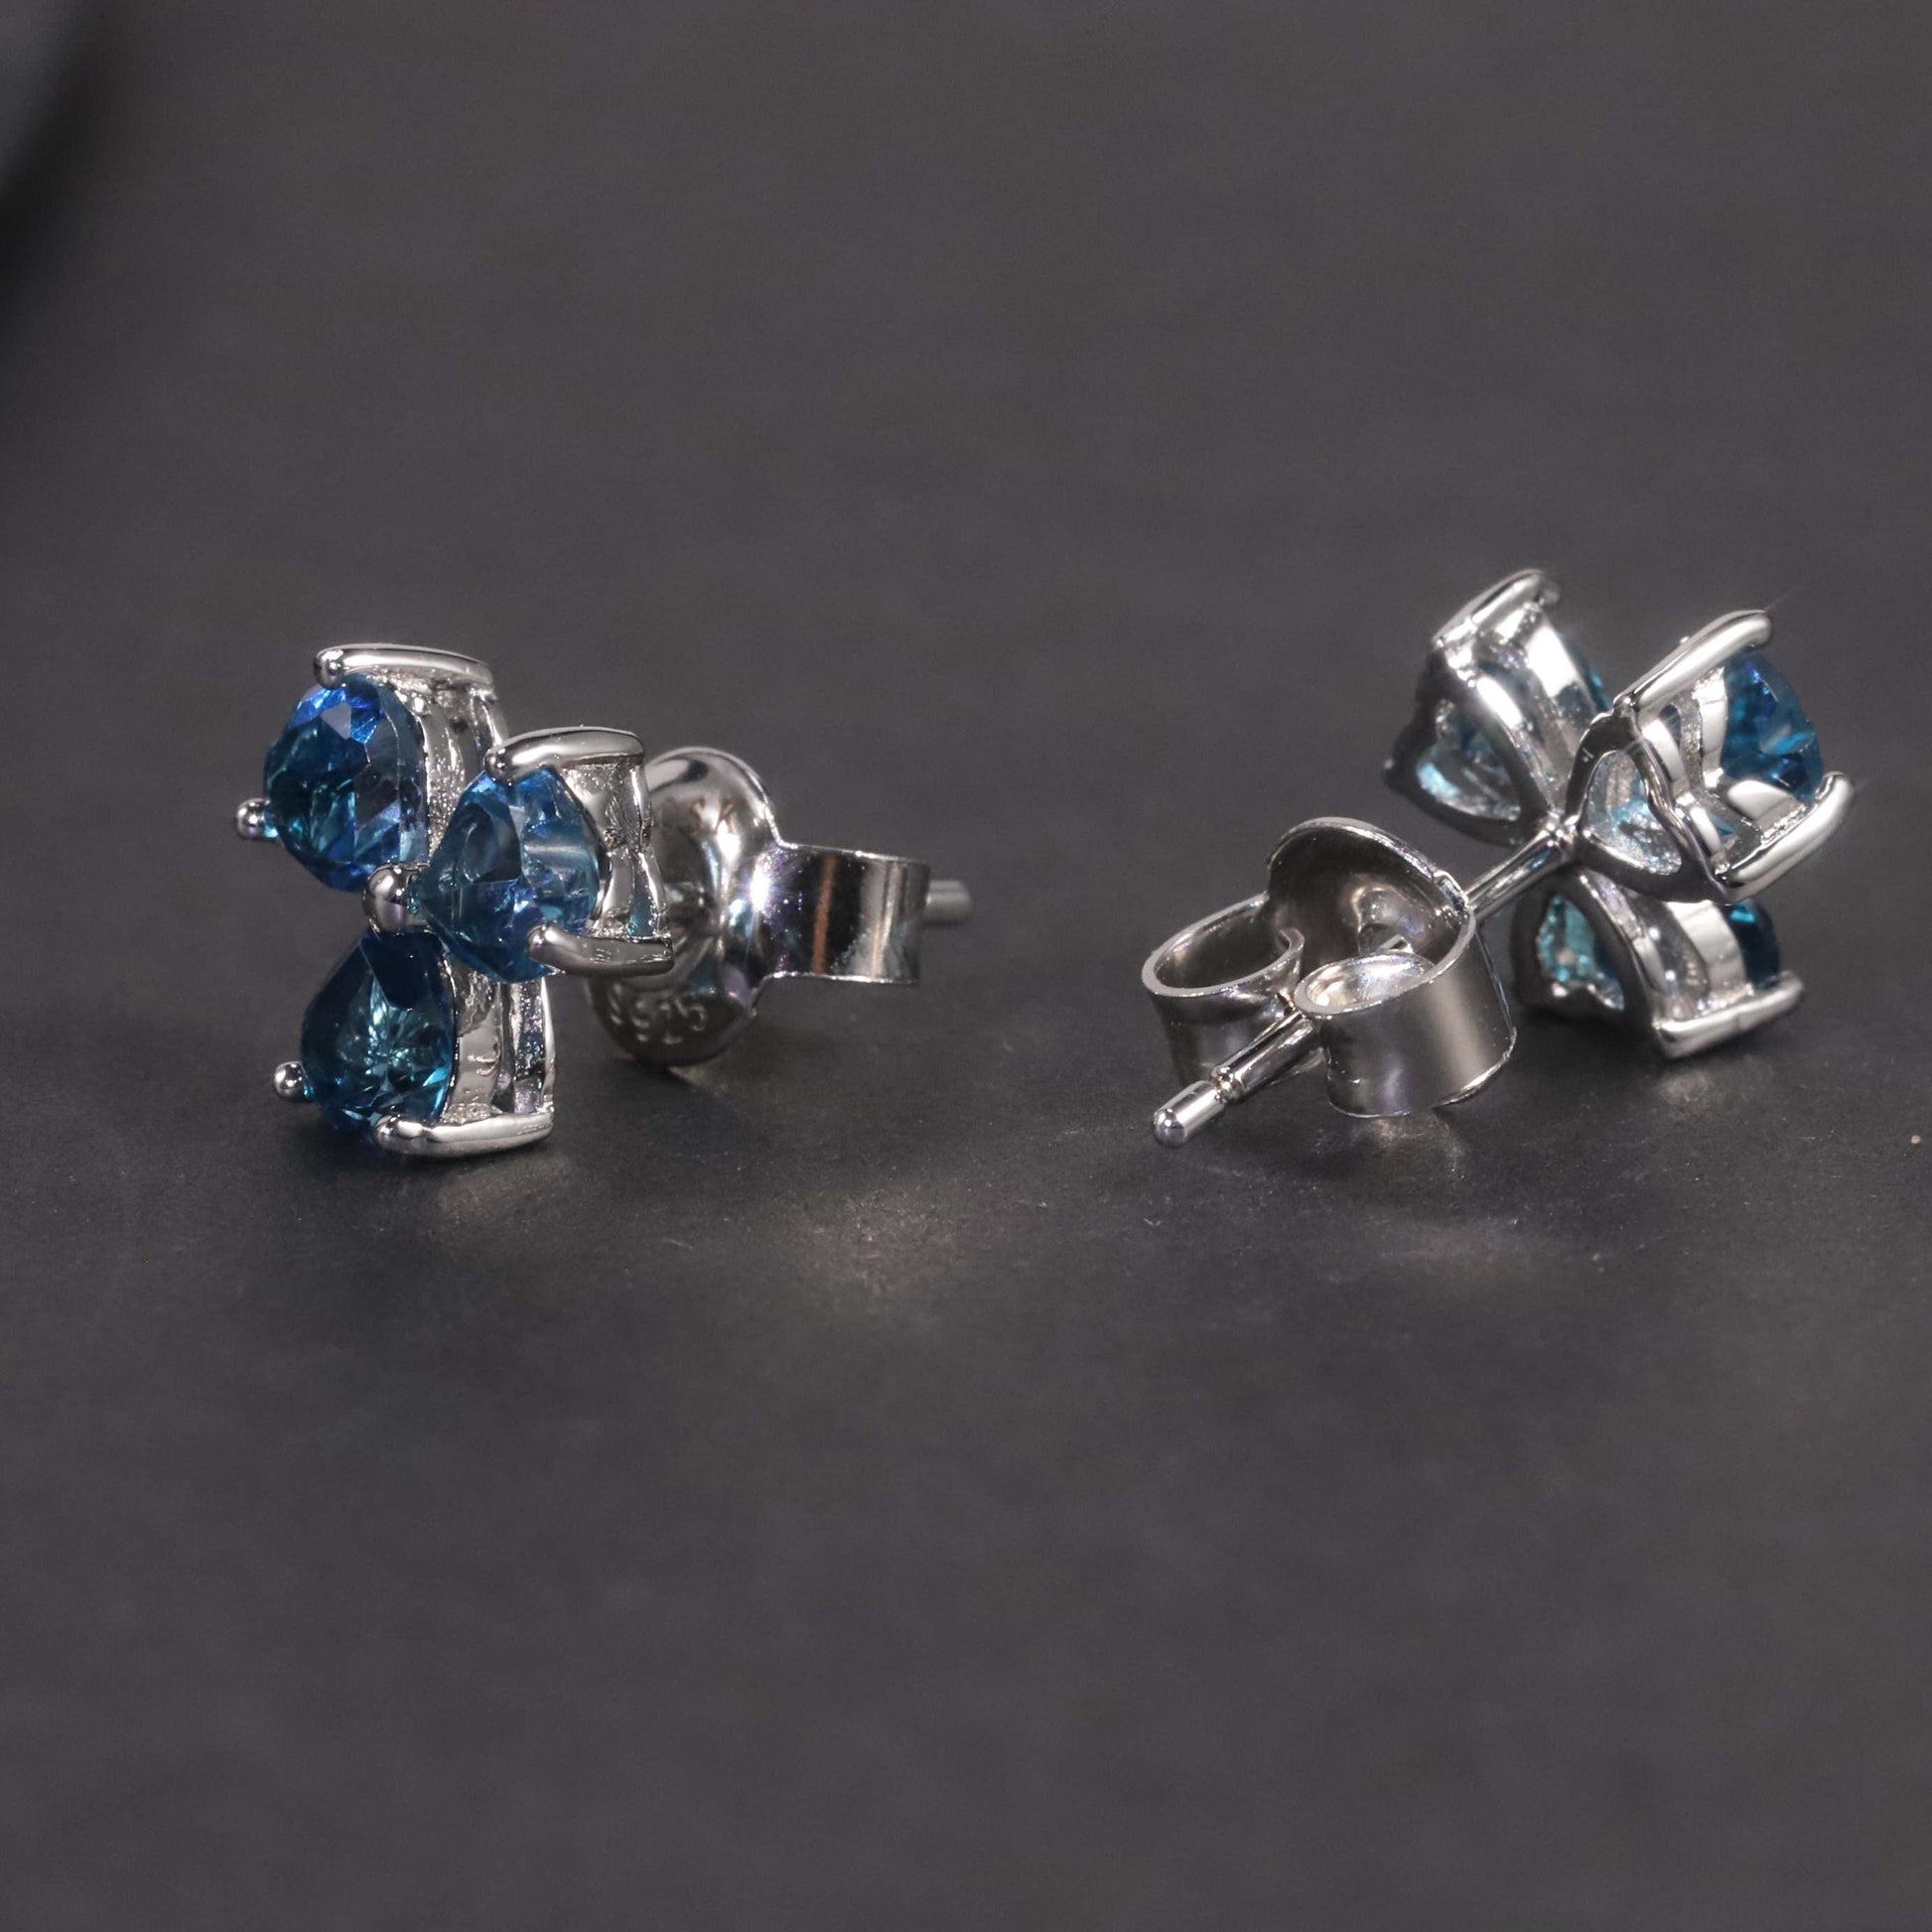 view of front and abck of lb topaz flower studs